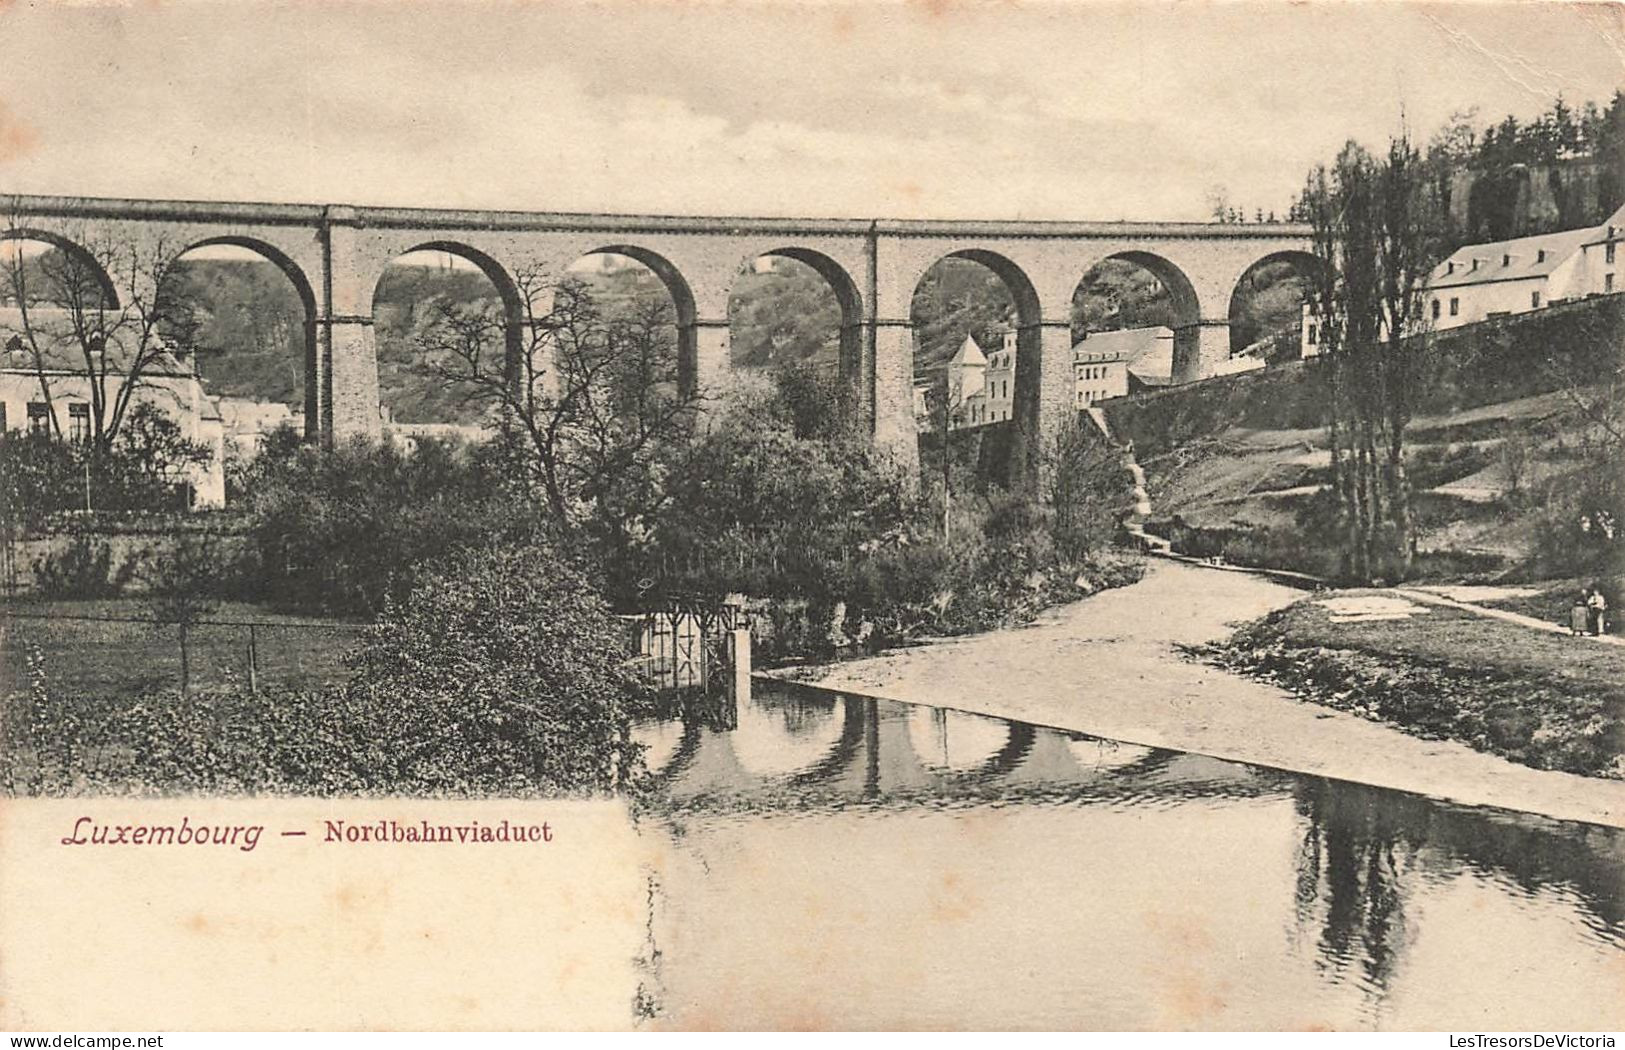 LUXEMBOURG - Nordbahnviaduct - Carte Postale Ancienne - Luxemburg - Stadt